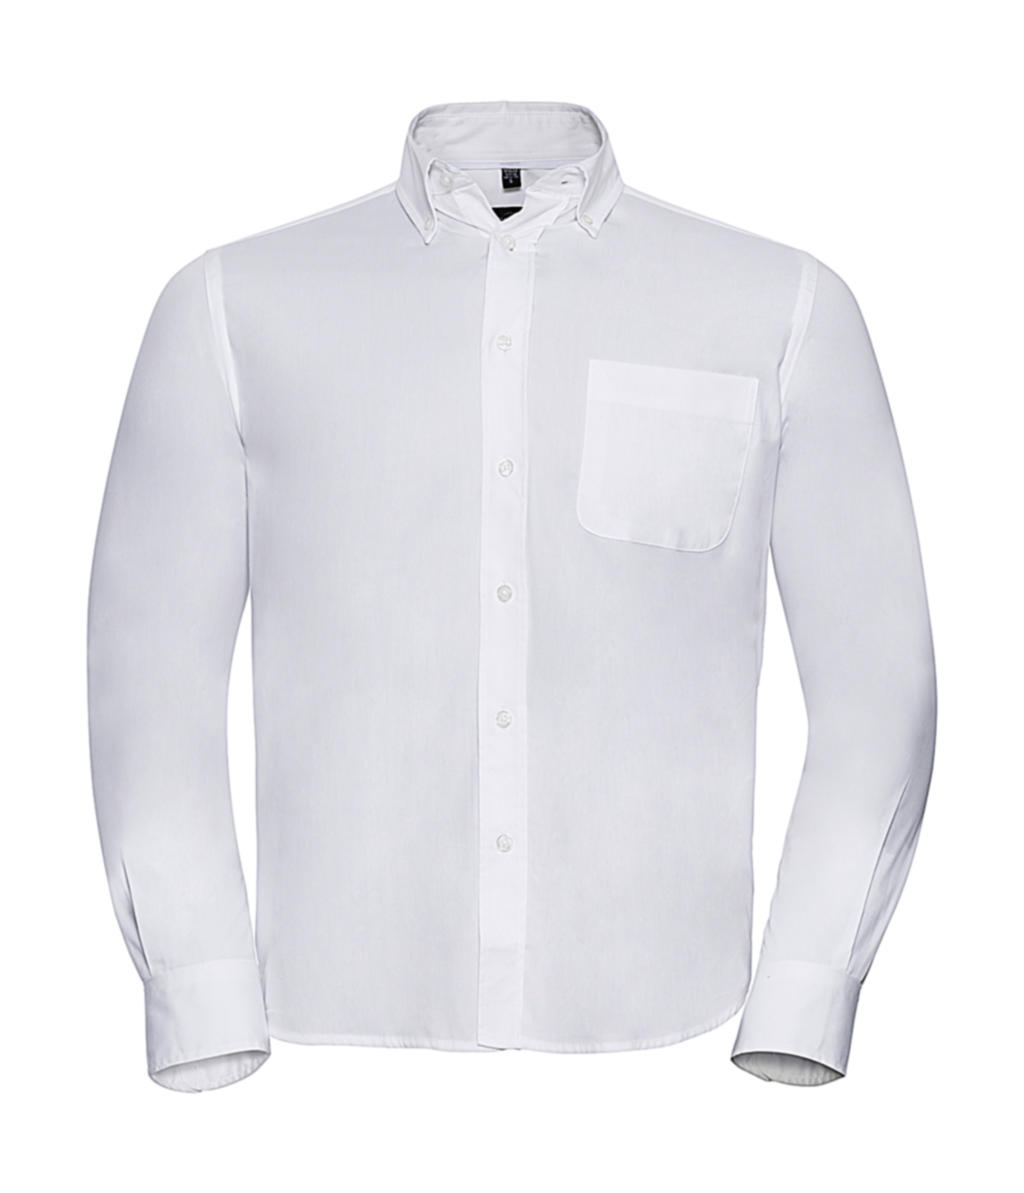  Long Sleeve Classic Twill Shirt in Farbe White